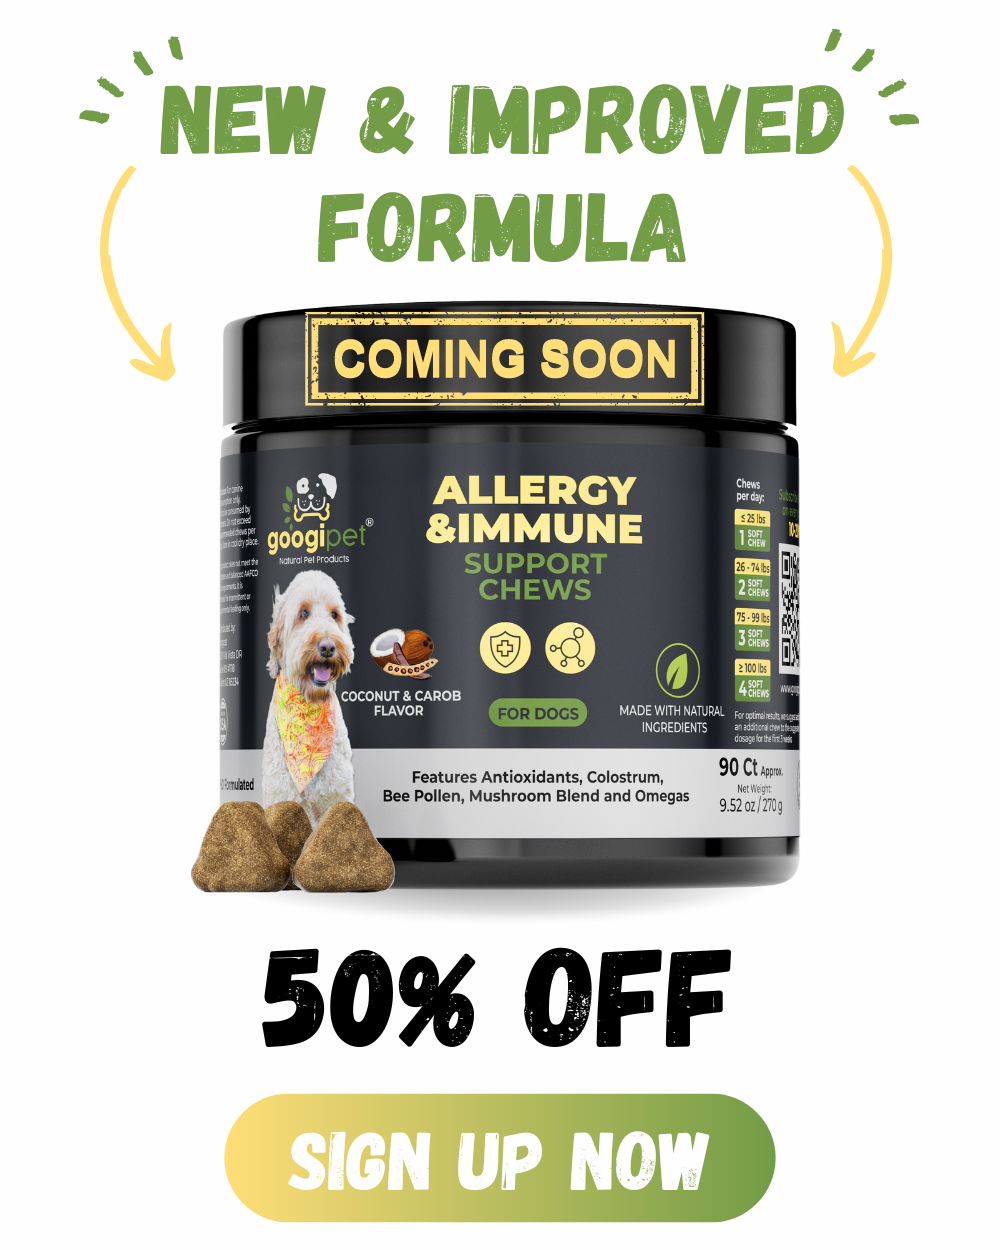 Teaser Allergy Mobile Launch Banner.png__PID:4341fe92-cdf7-49e9-be64-06d55a903baa